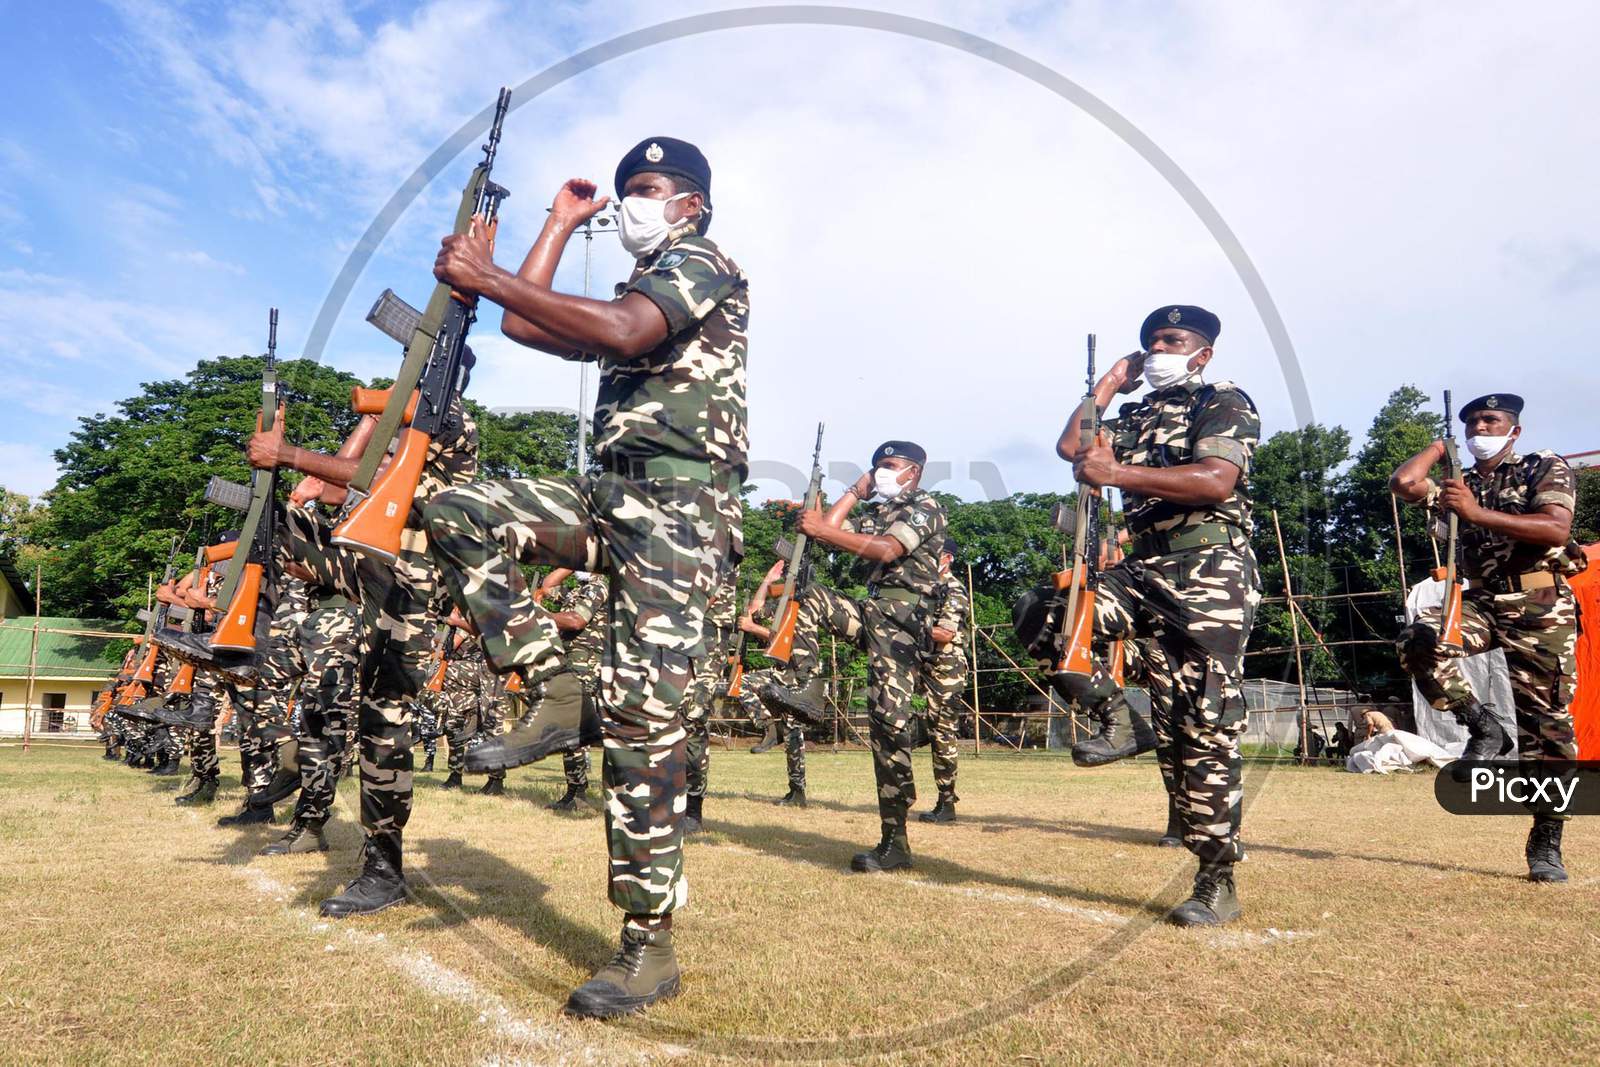 CRPF Personnel During The Practice Of The Independence Day Parade In Guwahati, On August 11,2020